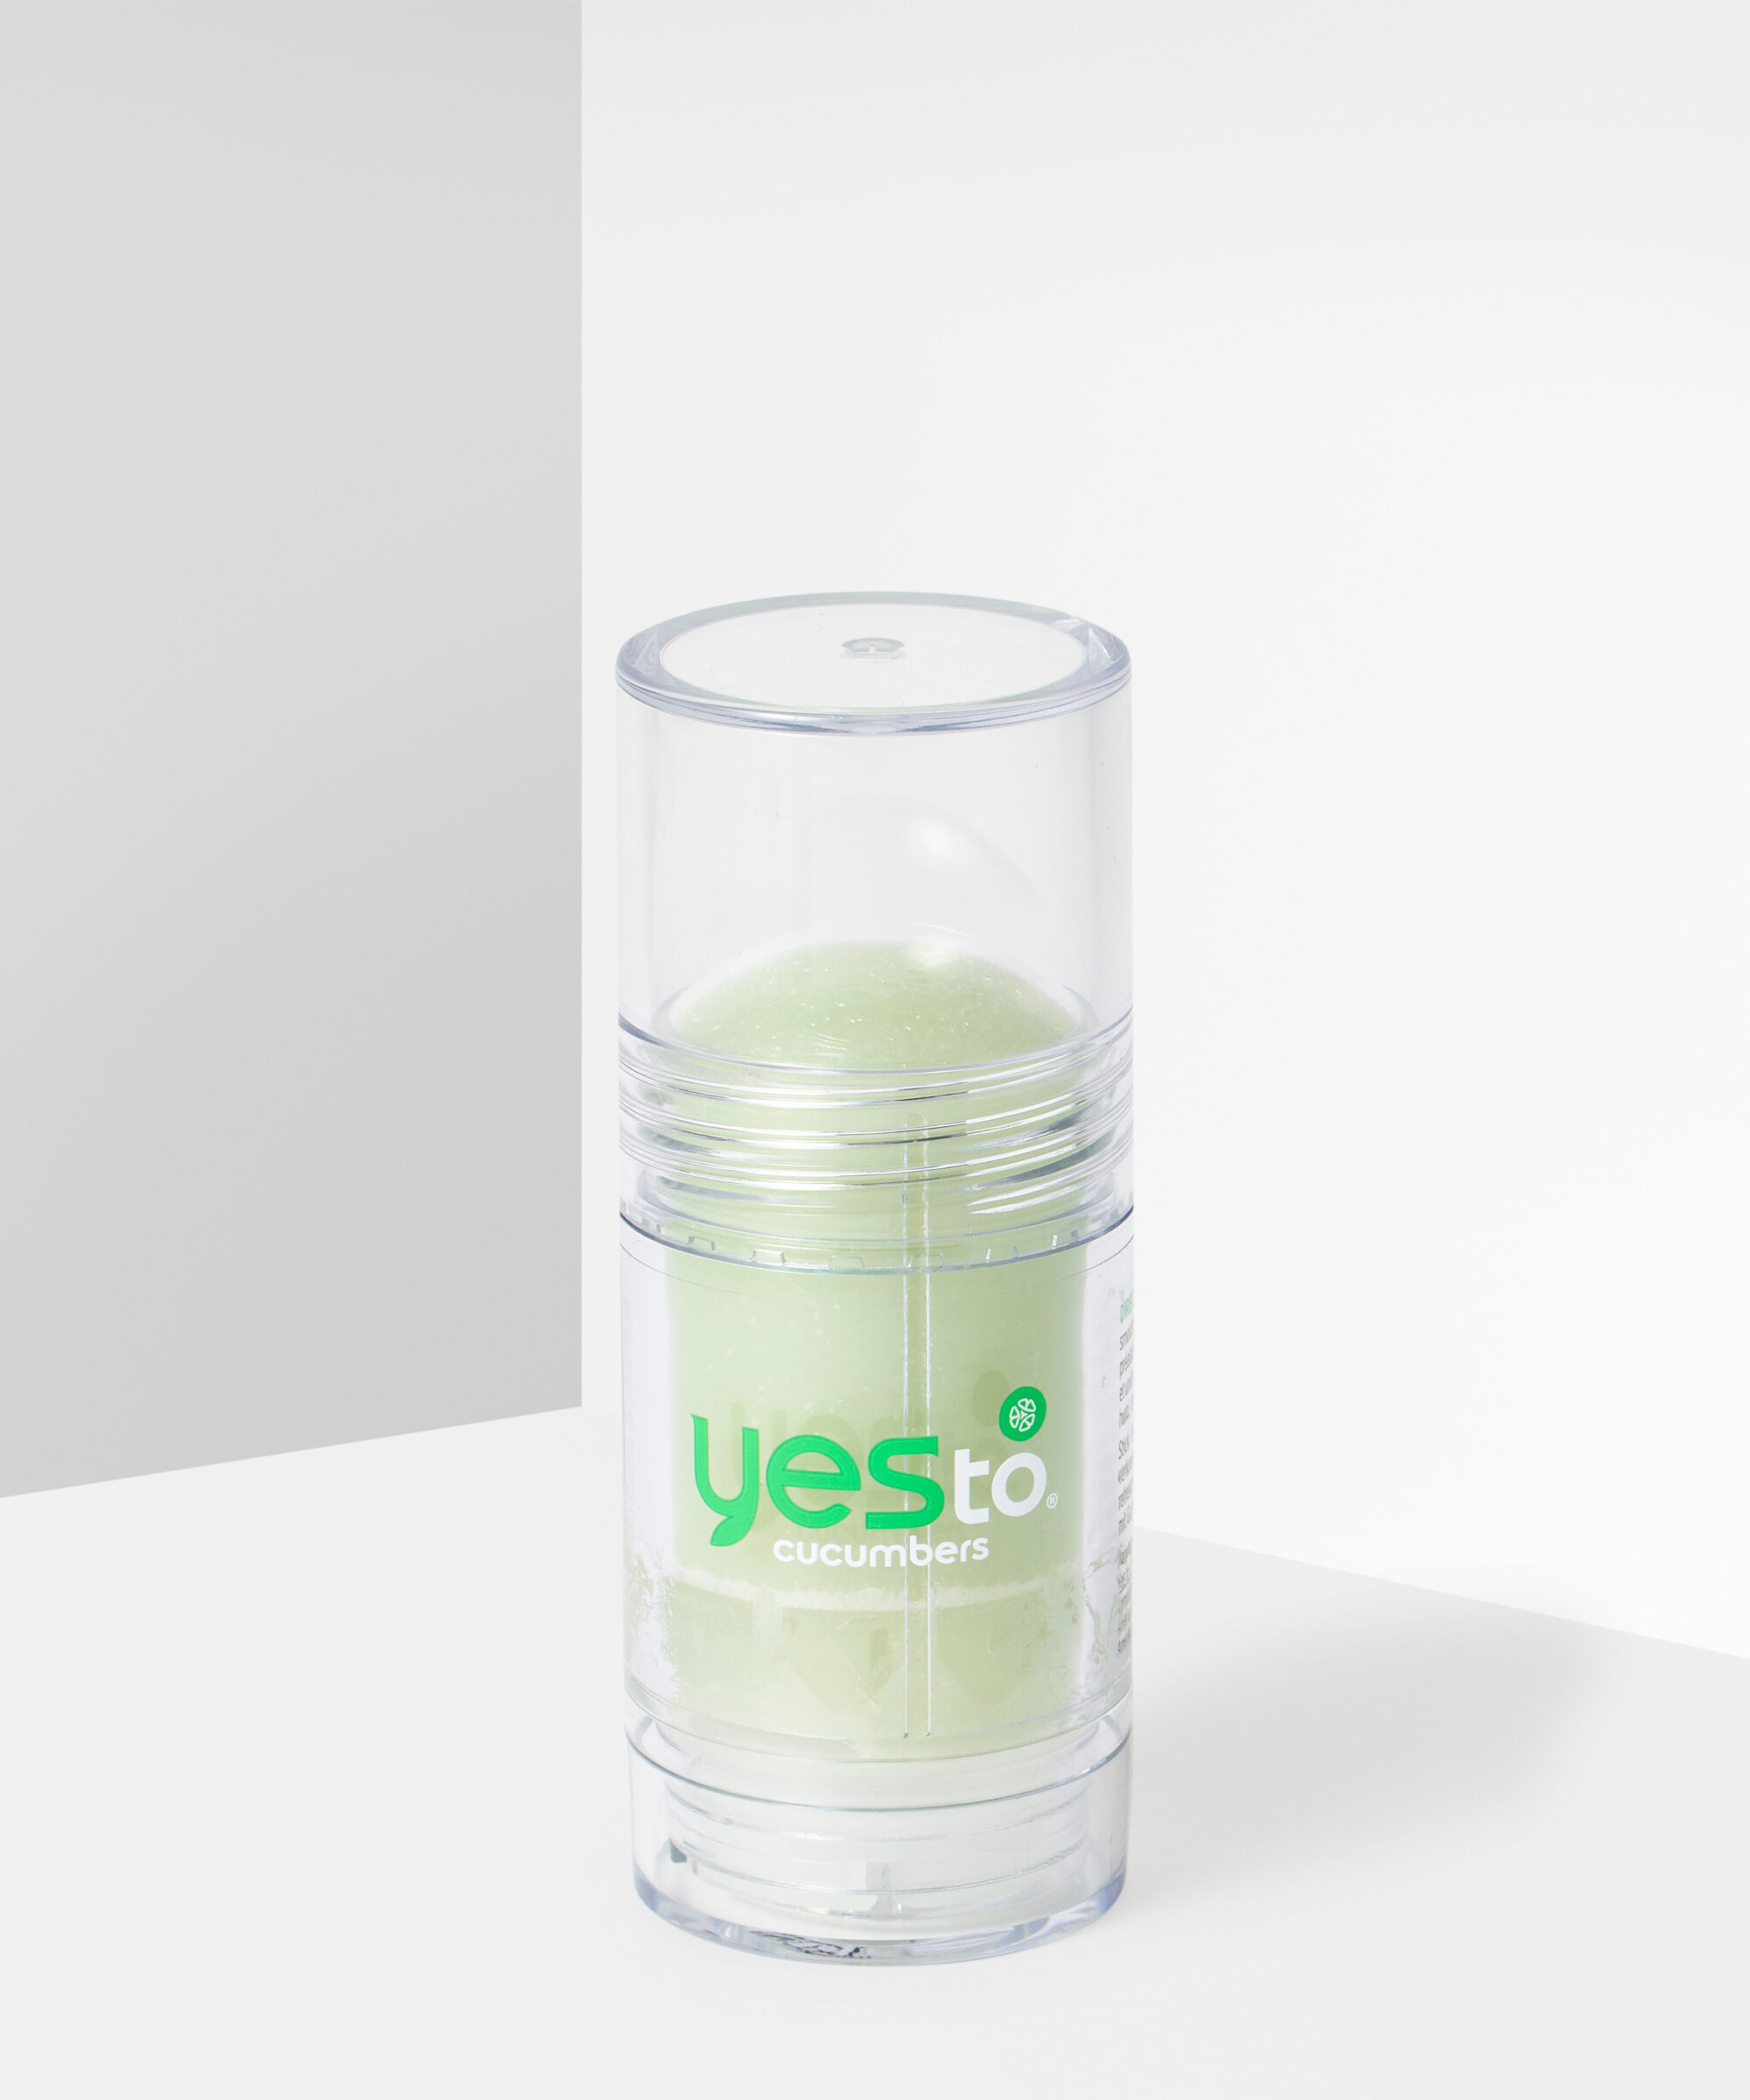 Yes to - Cucumbers Cooling Hydrating Primer Stick